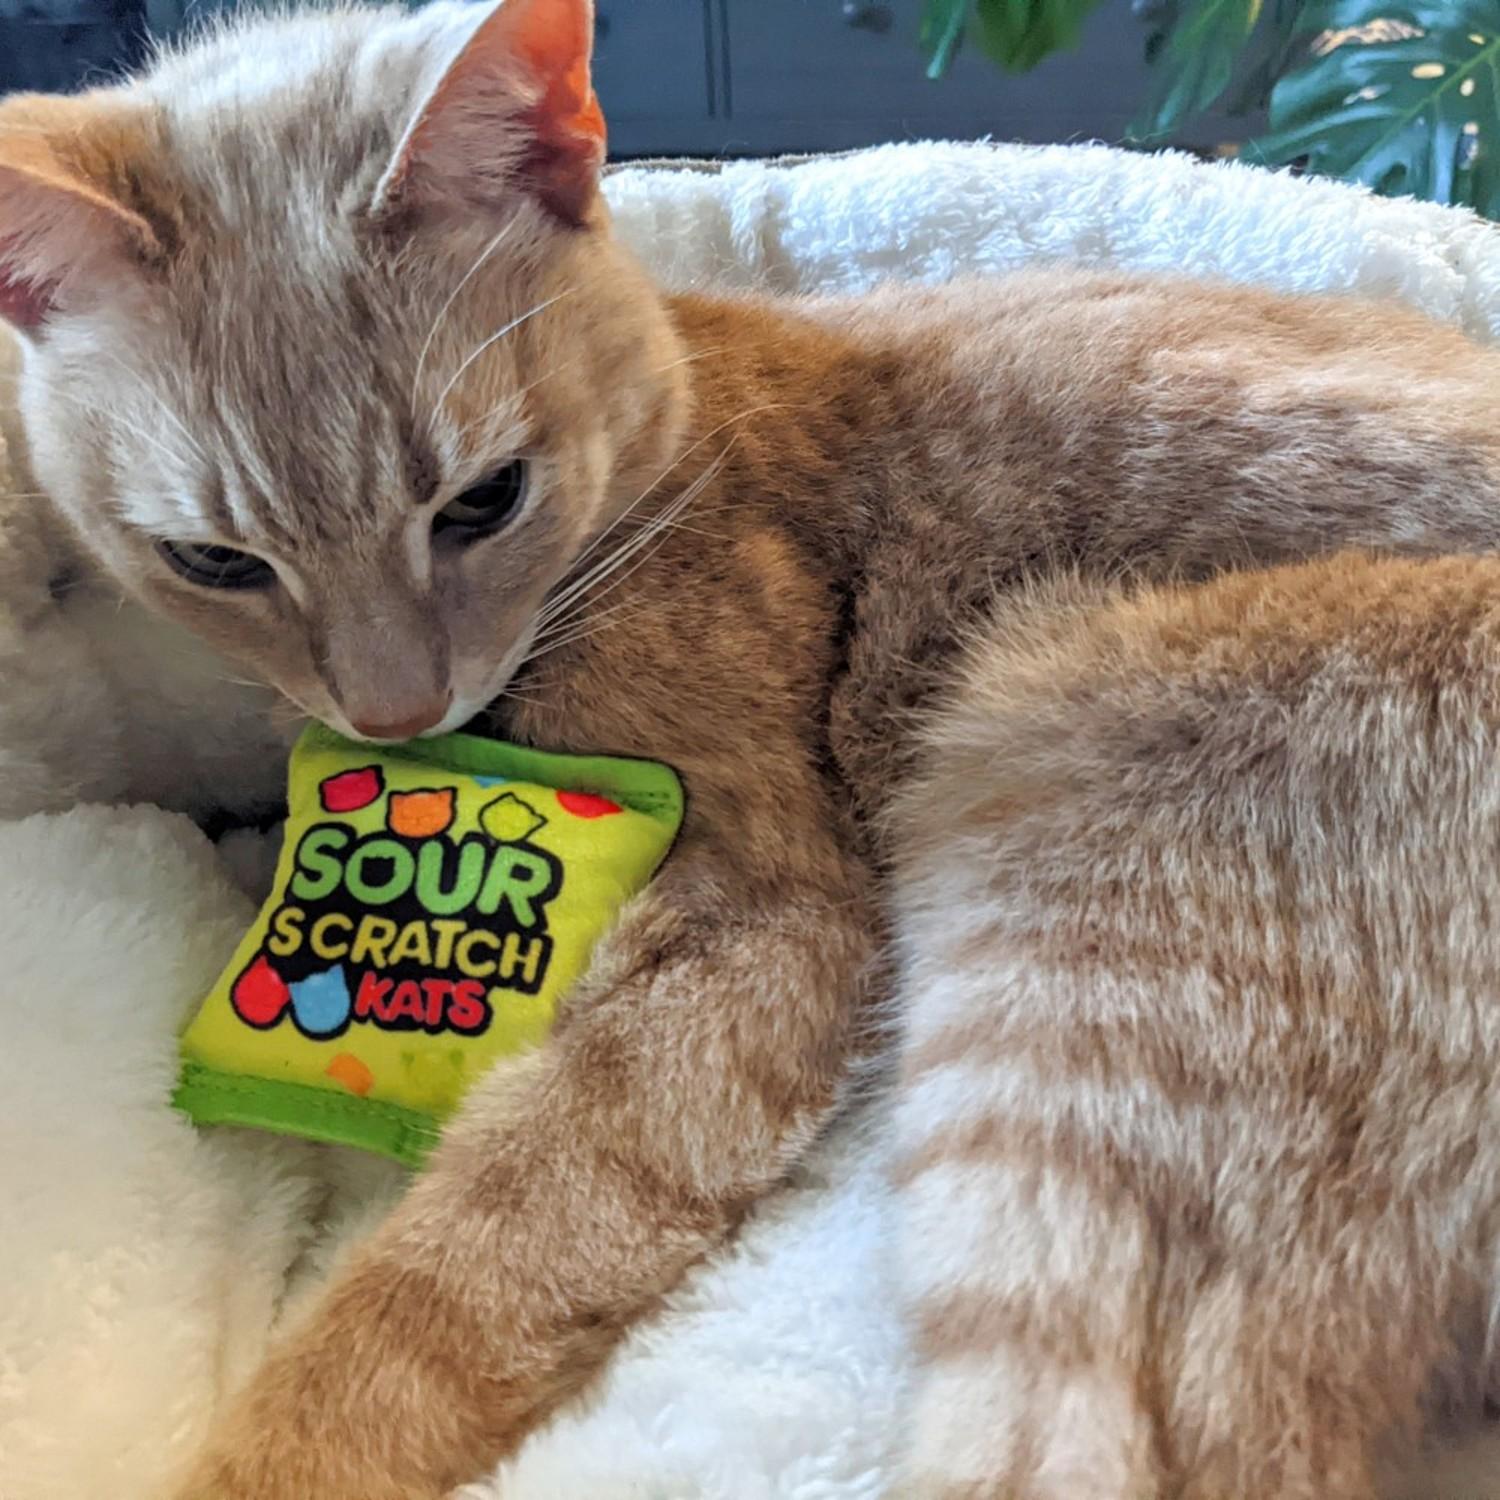 Kittybelles Food Plush Cat Toy - Sour Scratch